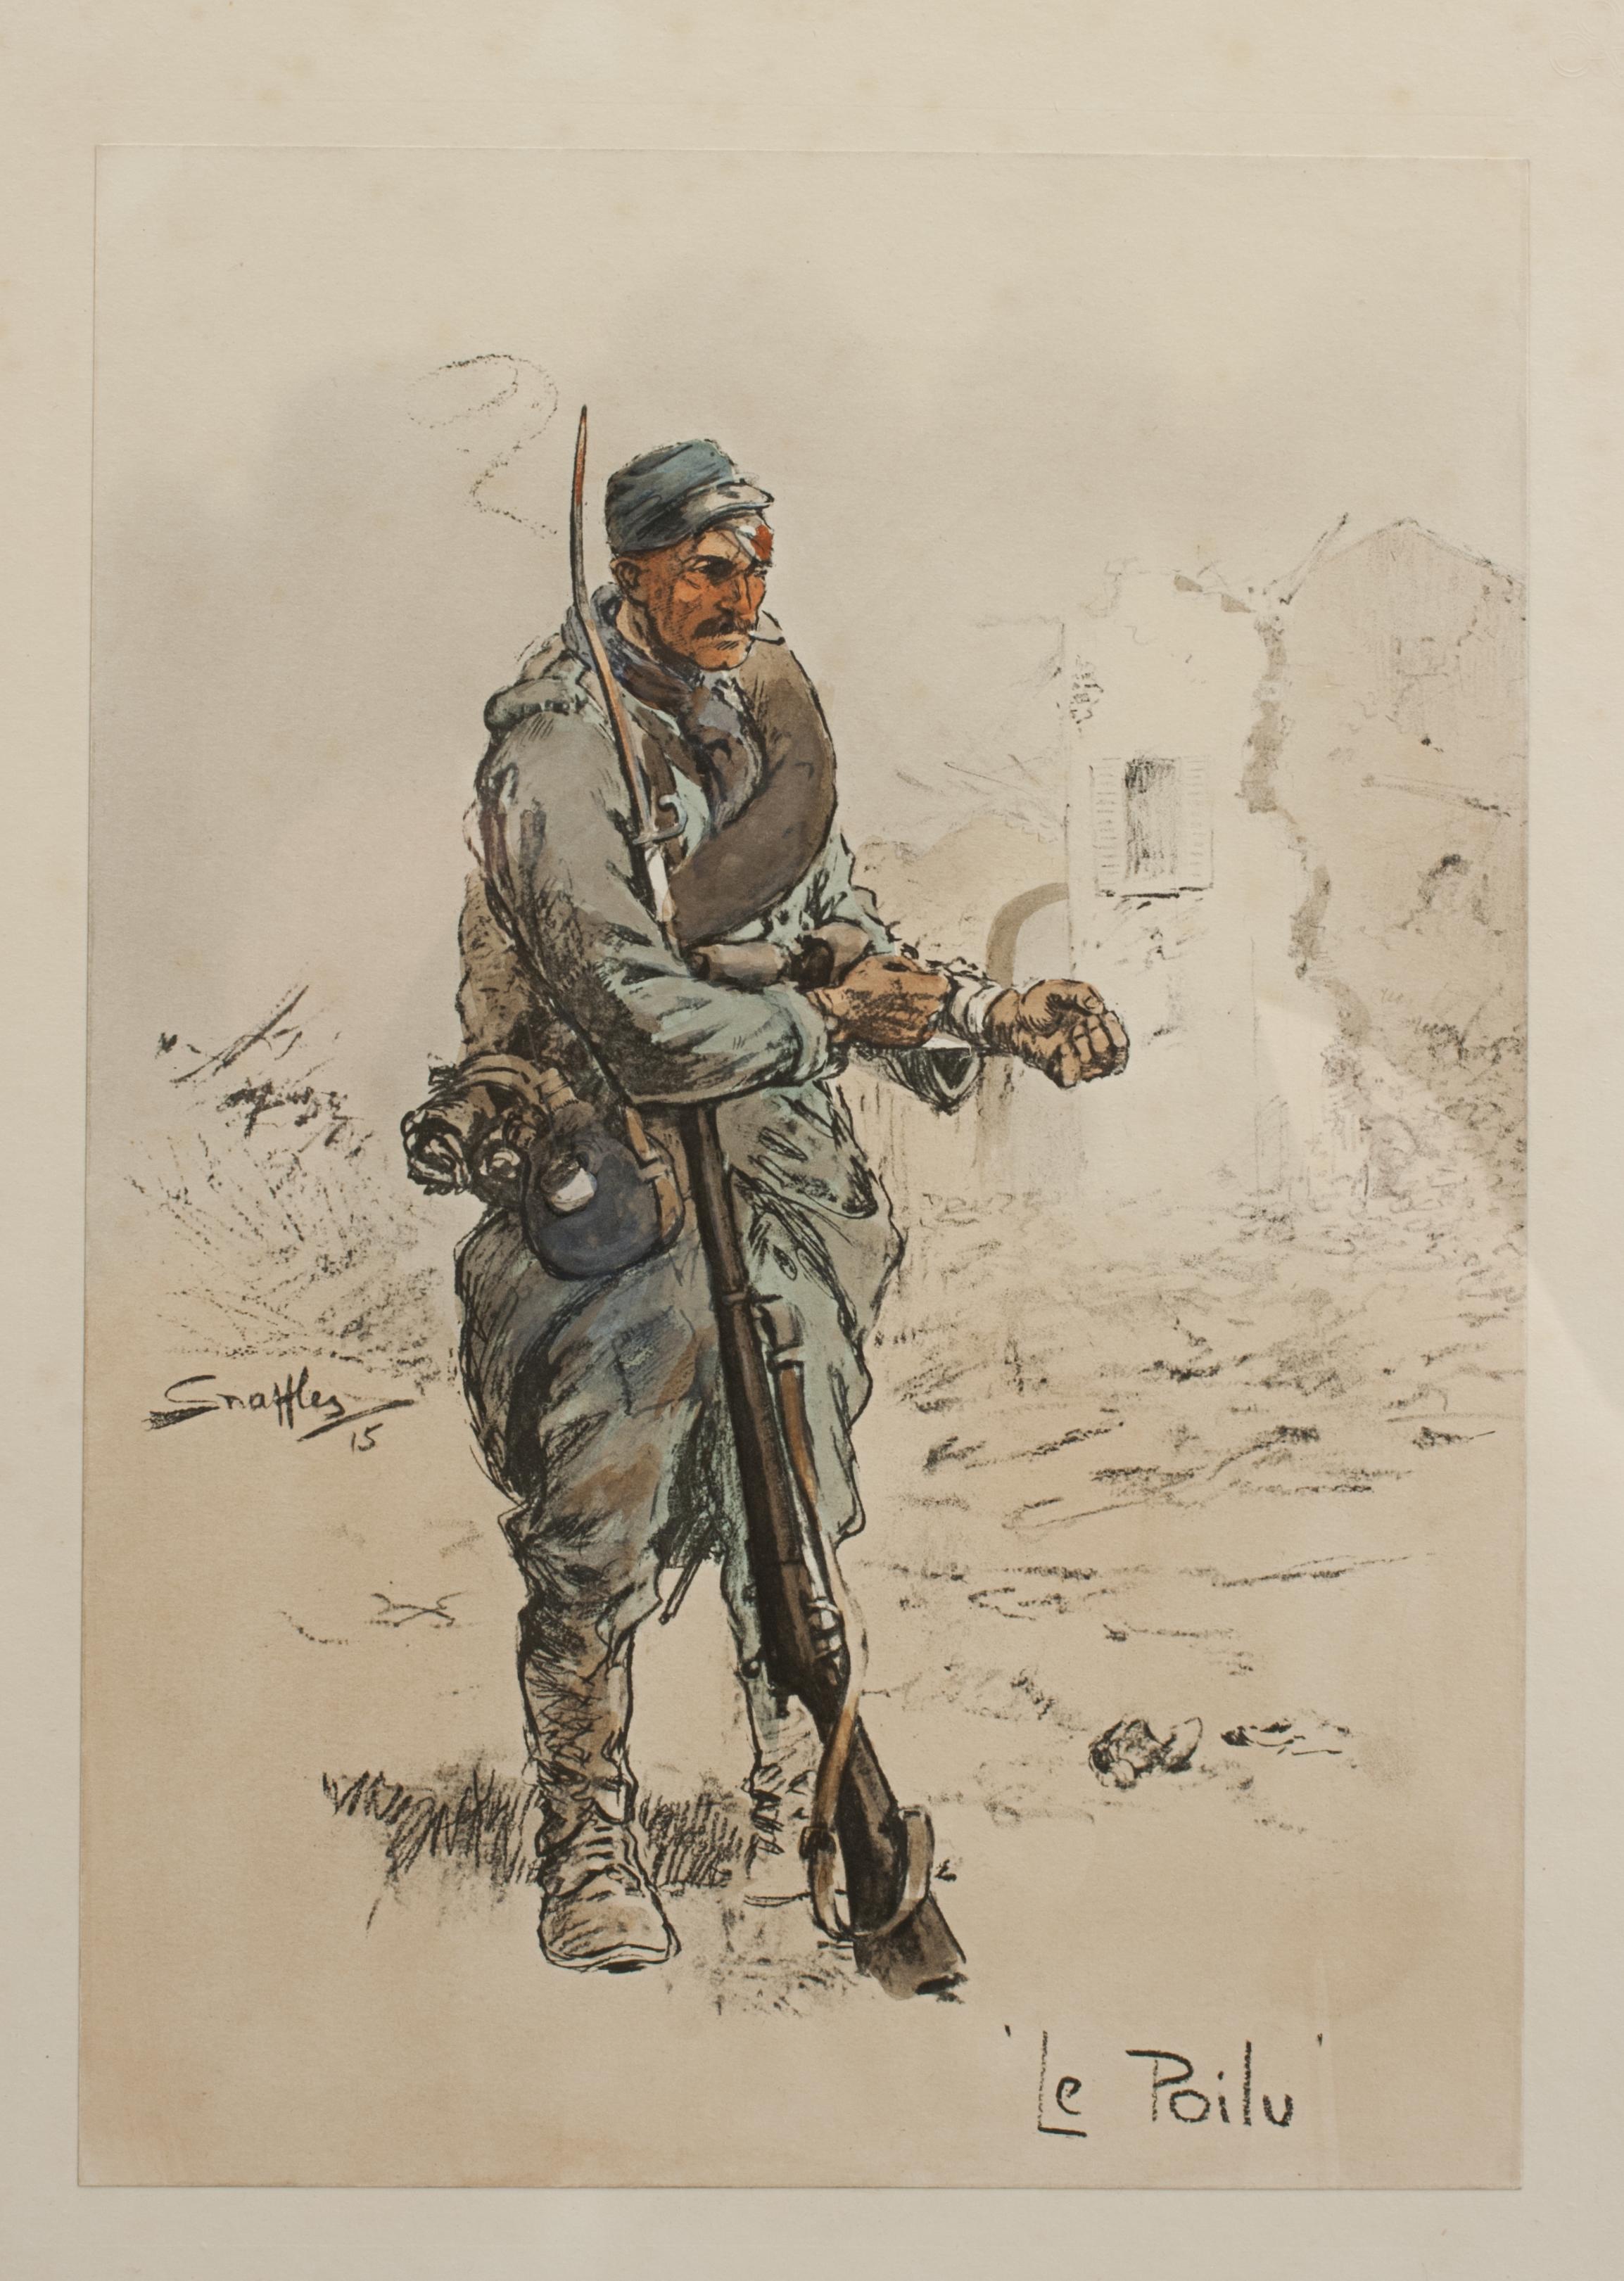 Snaffles Print, Wwi Military Print, 'le Poilu' In Good Condition For Sale In Oxfordshire, GB